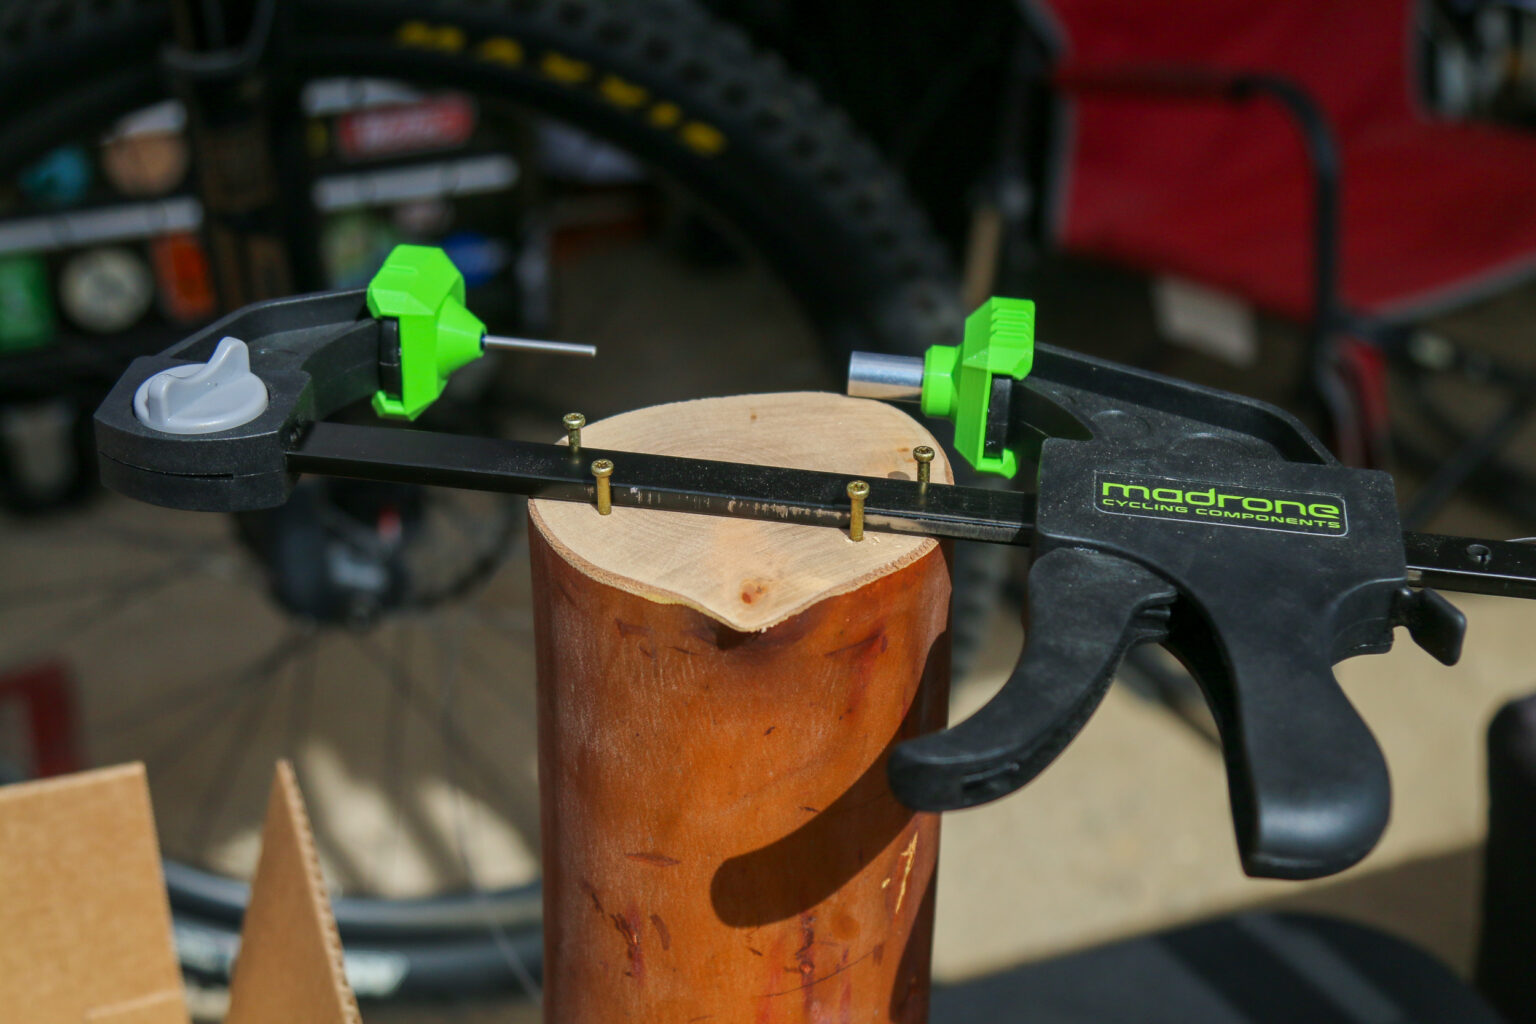 Madrone Cycles pin press tool